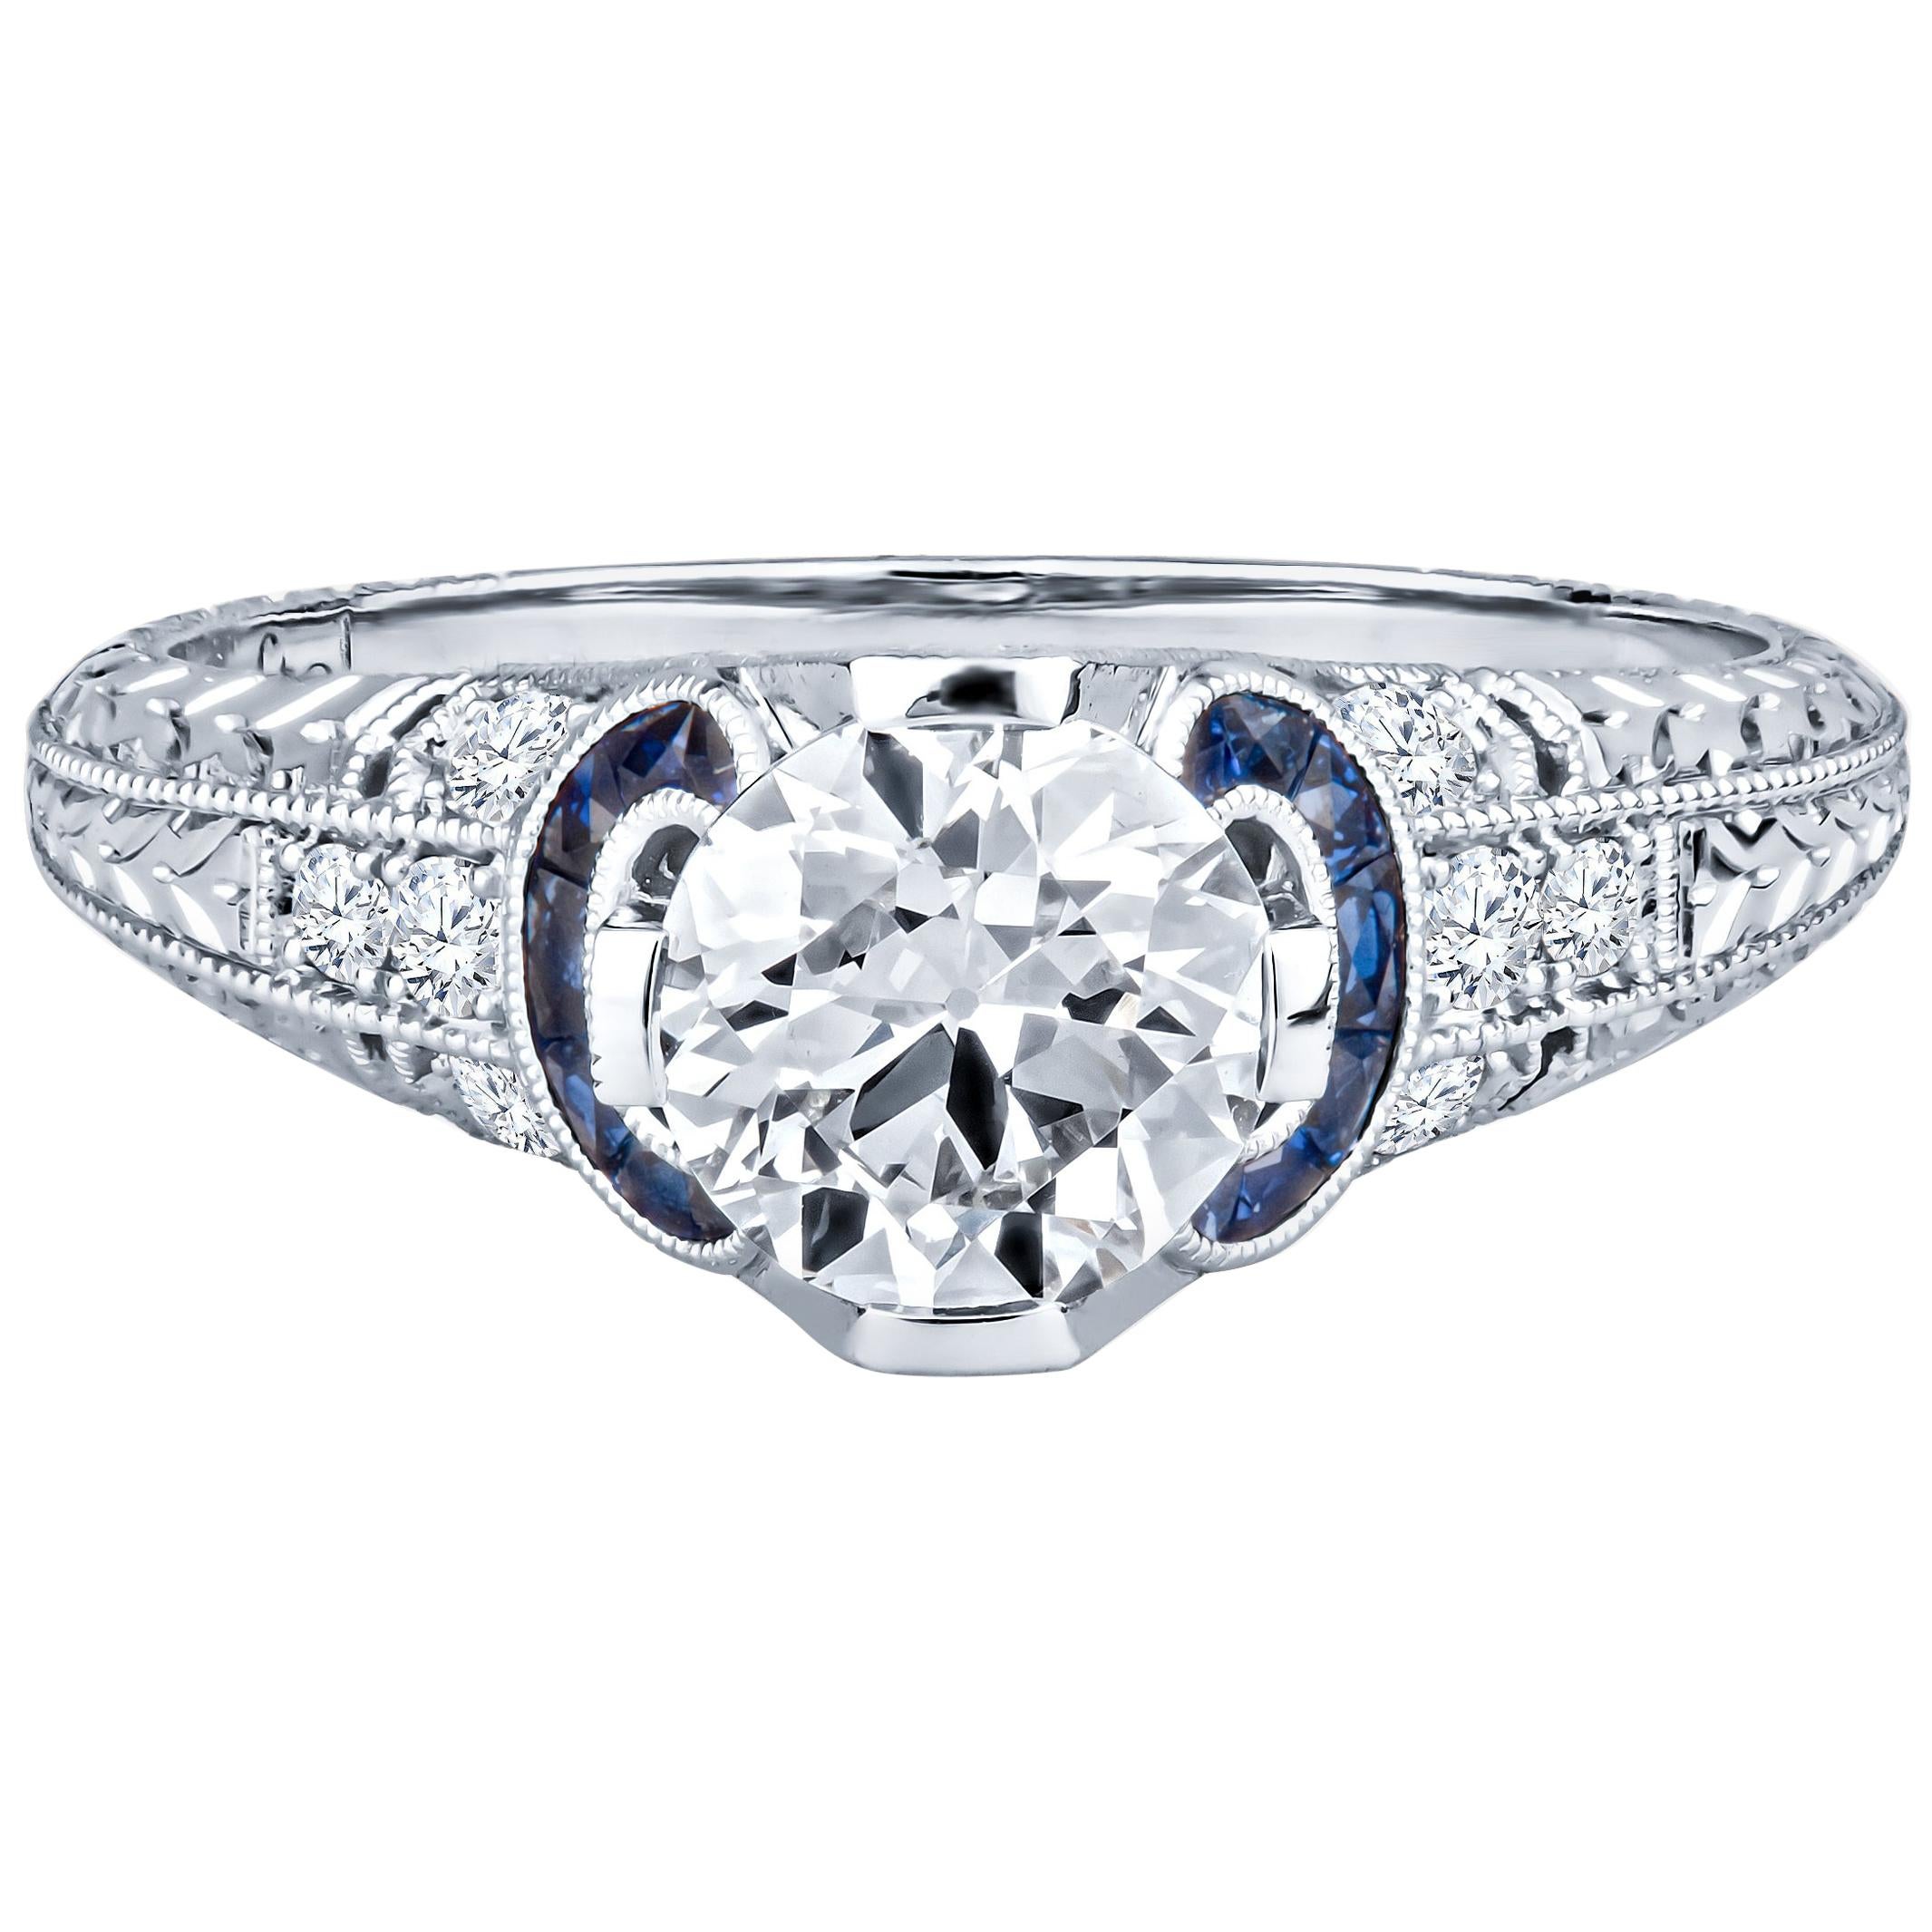 1.03 Carat Round Diamond with 0.21 Carat Sapphire Accents Vintage Inspired Ring For Sale